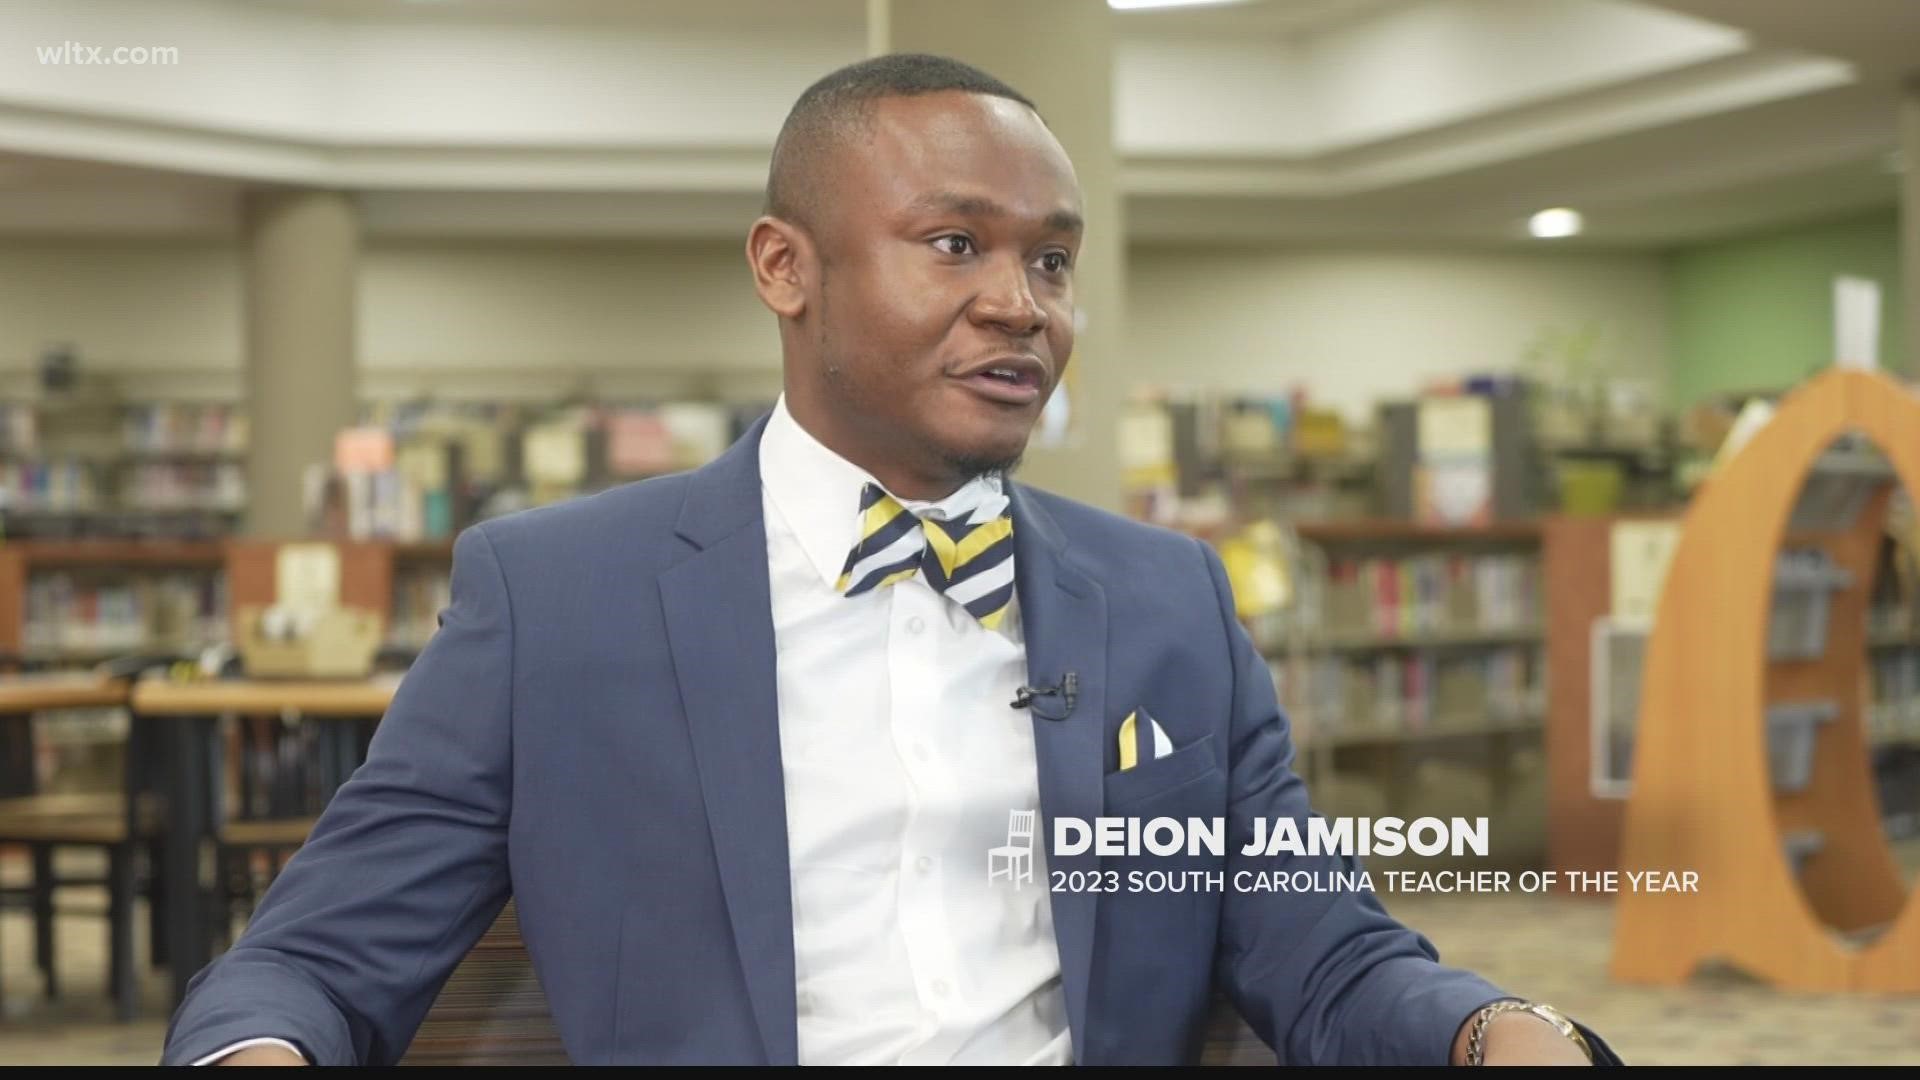 Born and educated in what's historically been called the educational “Corridor of Shame," Deion Jamison says he's seen education as the key to overcoming adversity.